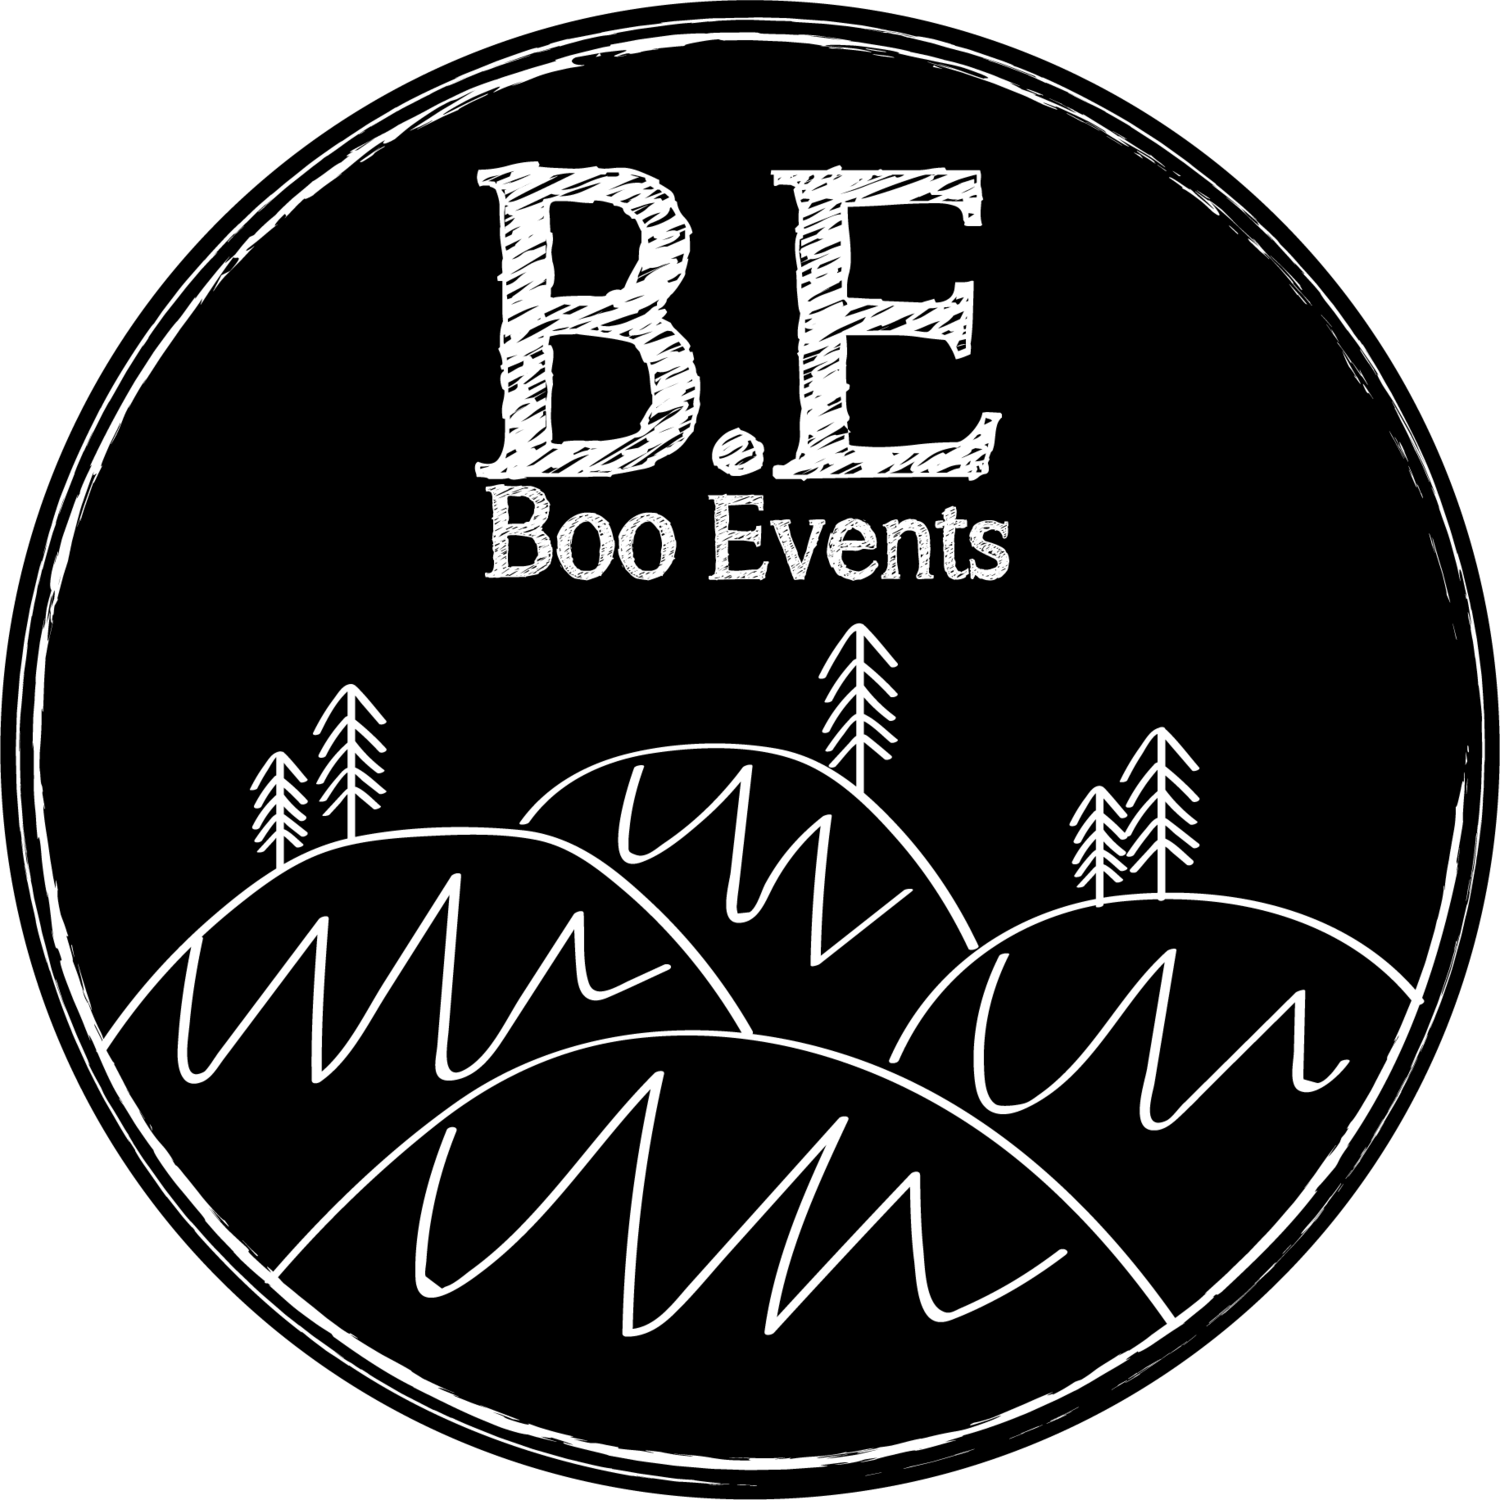 Boo Events